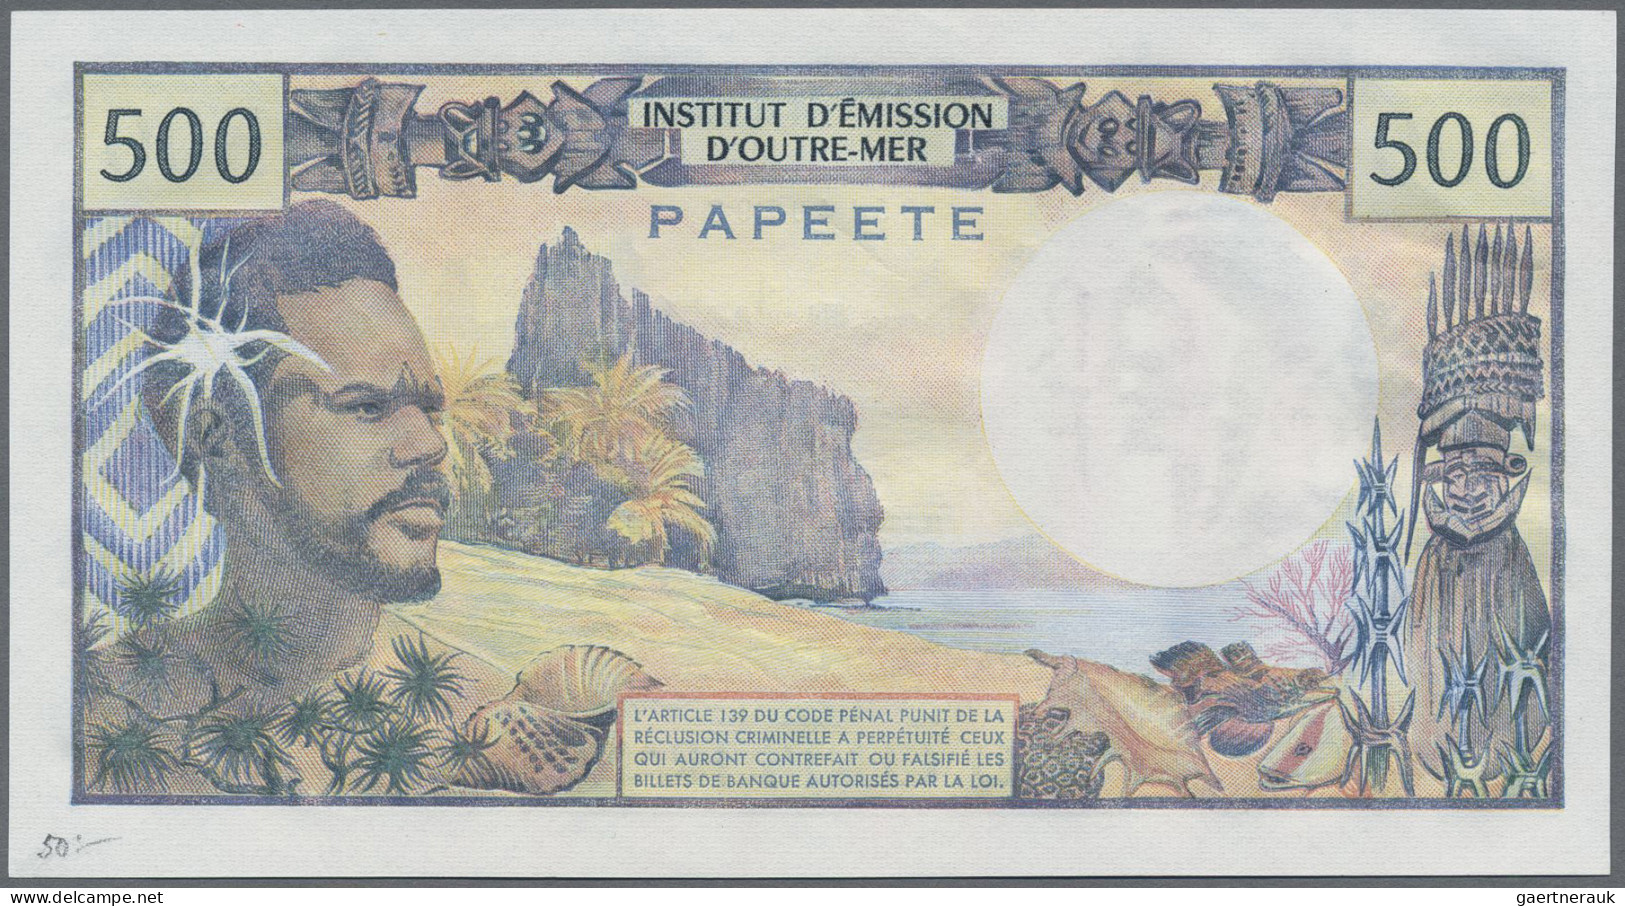 Tahiti: Institut D'Emission D'Outre-Mer – PAPEETE, Pair With 100 Francs ND(1973) - Other - Oceania